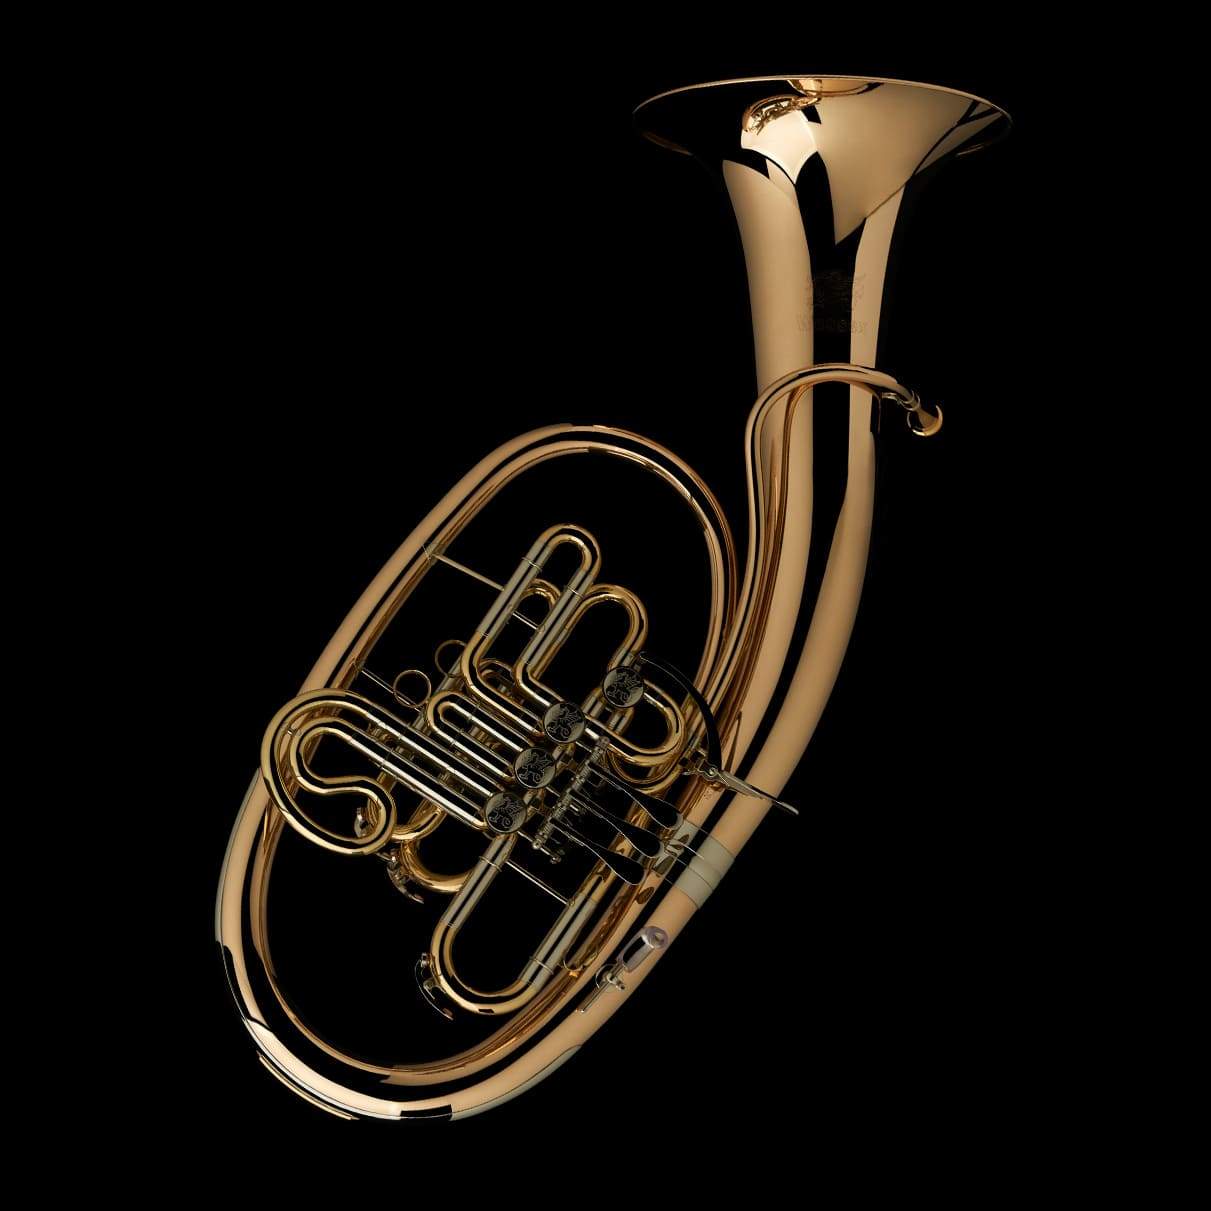 An image of a Bb/F Wagner Tuba from Wessex Tubas